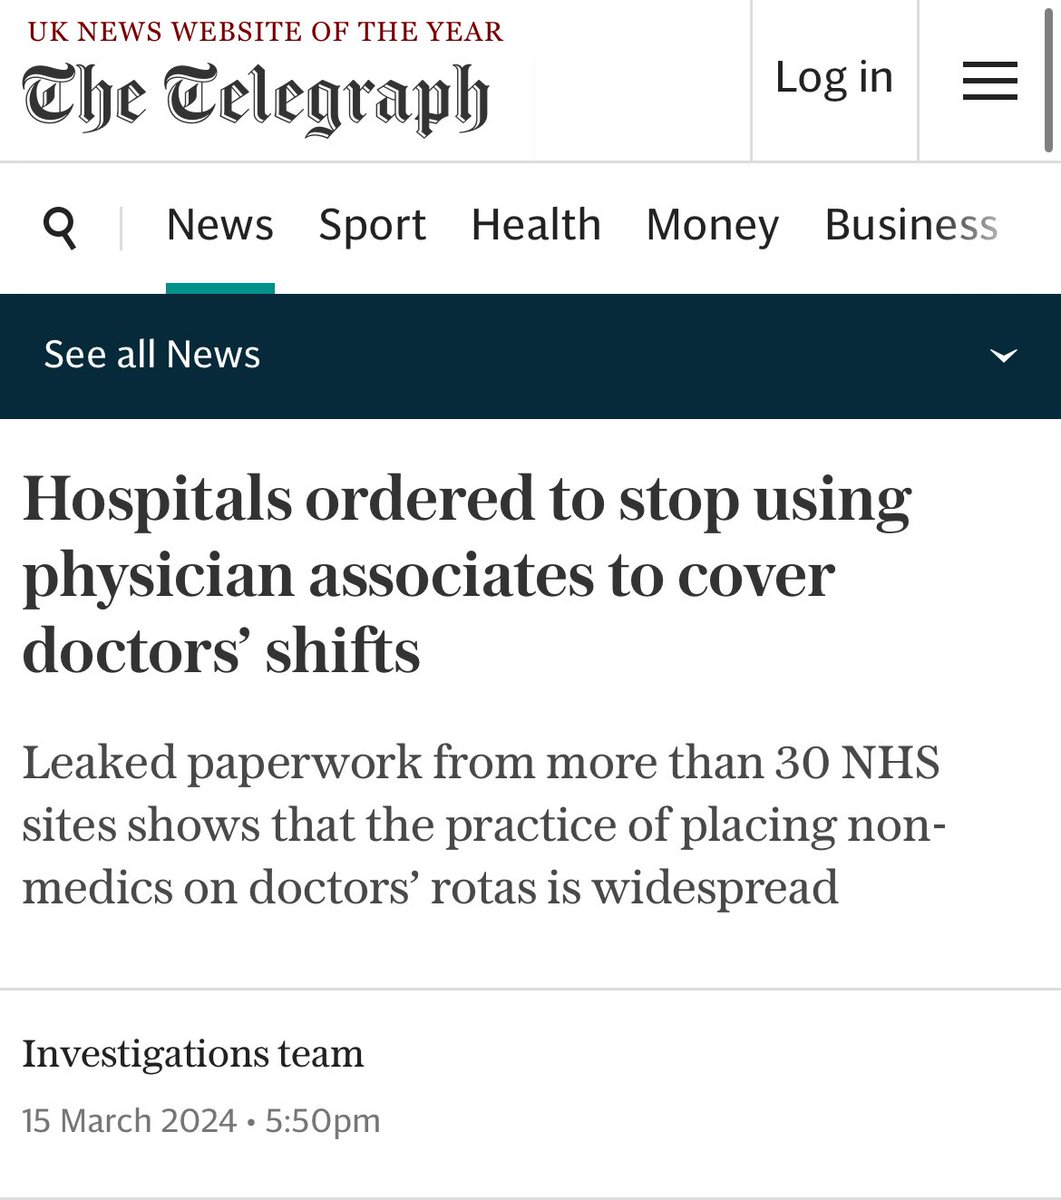 Thanks to @JanetEastham who yet again with her excellent investigative reporting has found evidence of massive scale replacement of doctors with Physician Associates, something we have been reassured time and time again isn’t happening. telegraph.co.uk/news/2024/03/1…